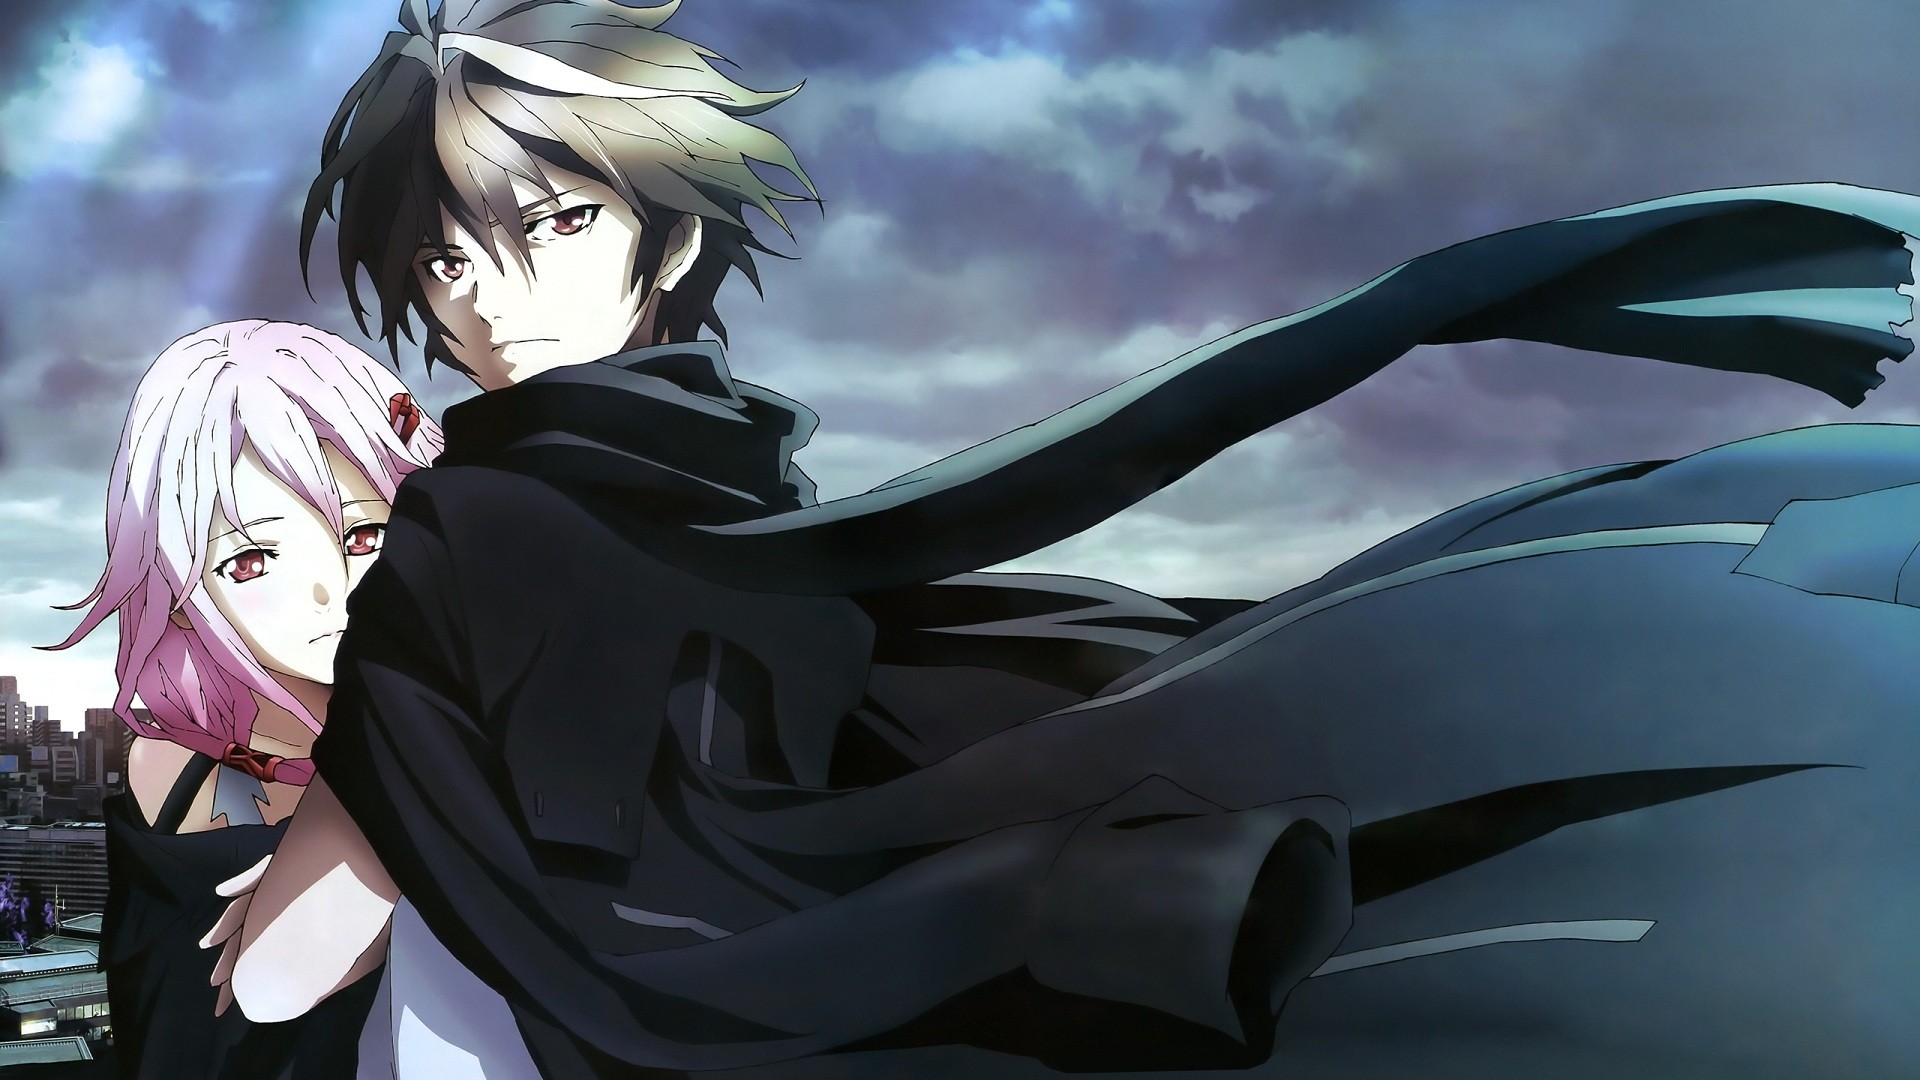 download guilty crown movie for free